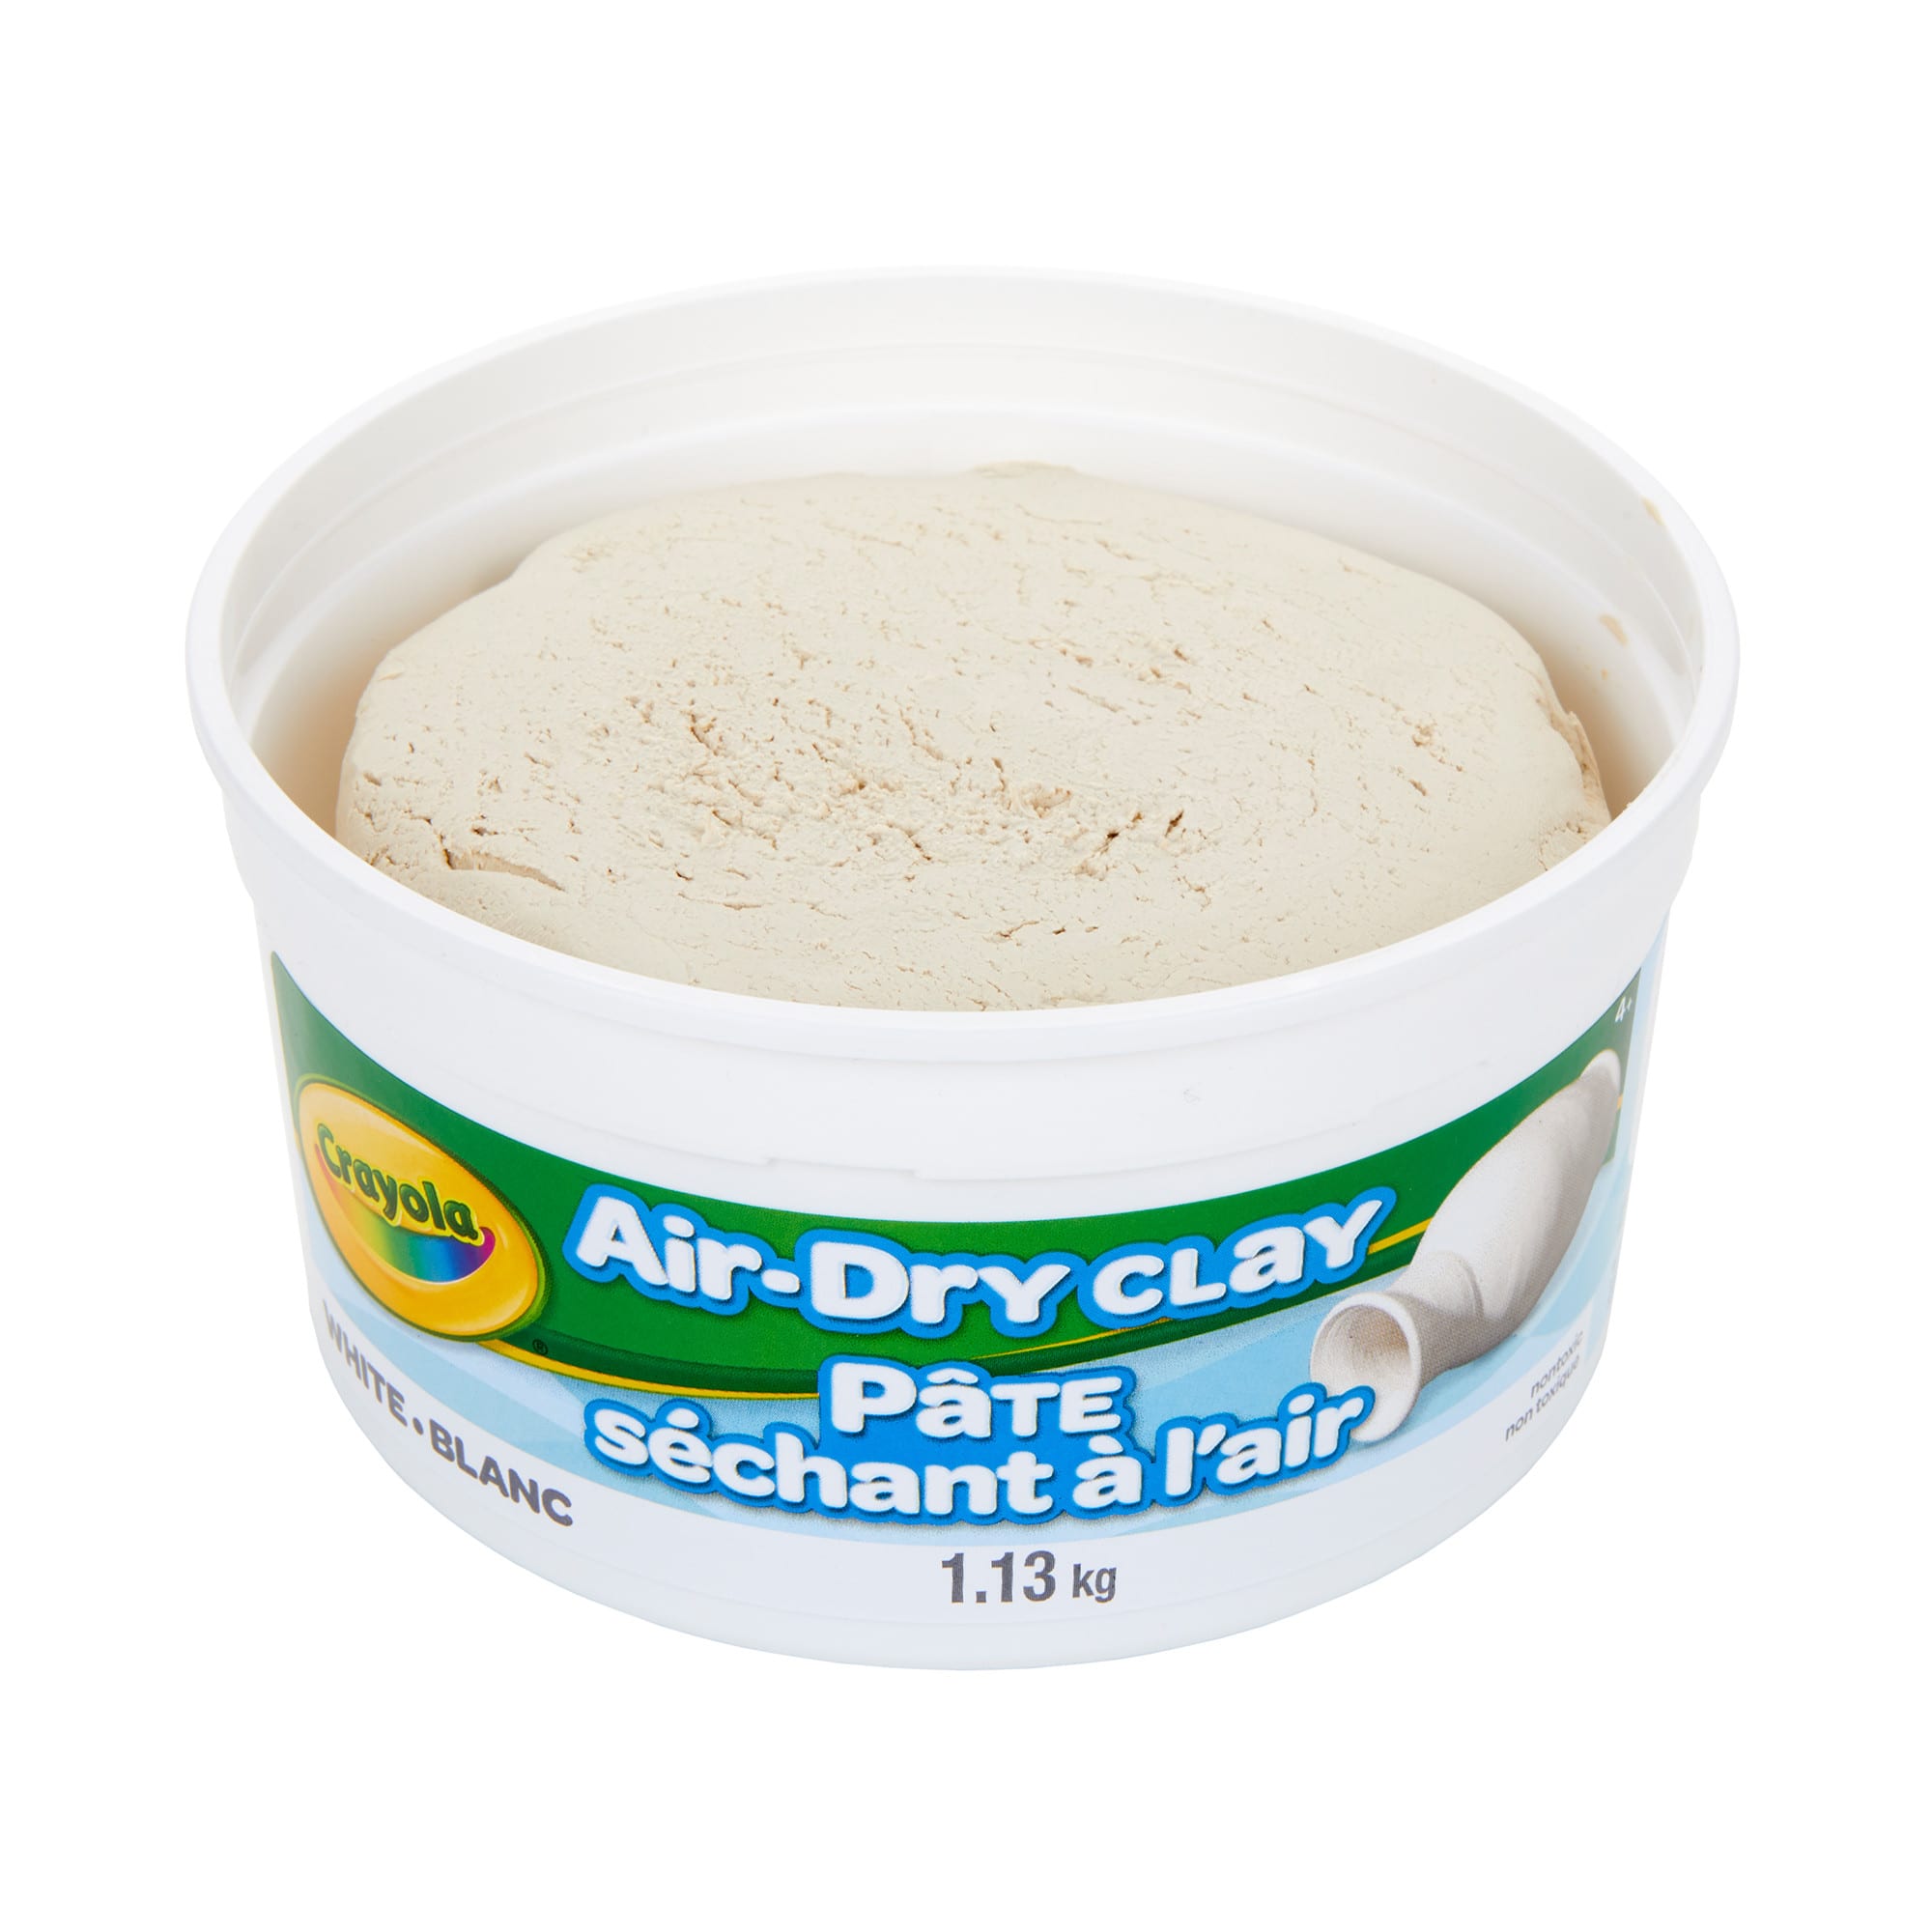 Crayola Air Dry Clay Bucket No Bake Clay for Kids Modeling Clay Alternative  5 lb Resealable Bucket White